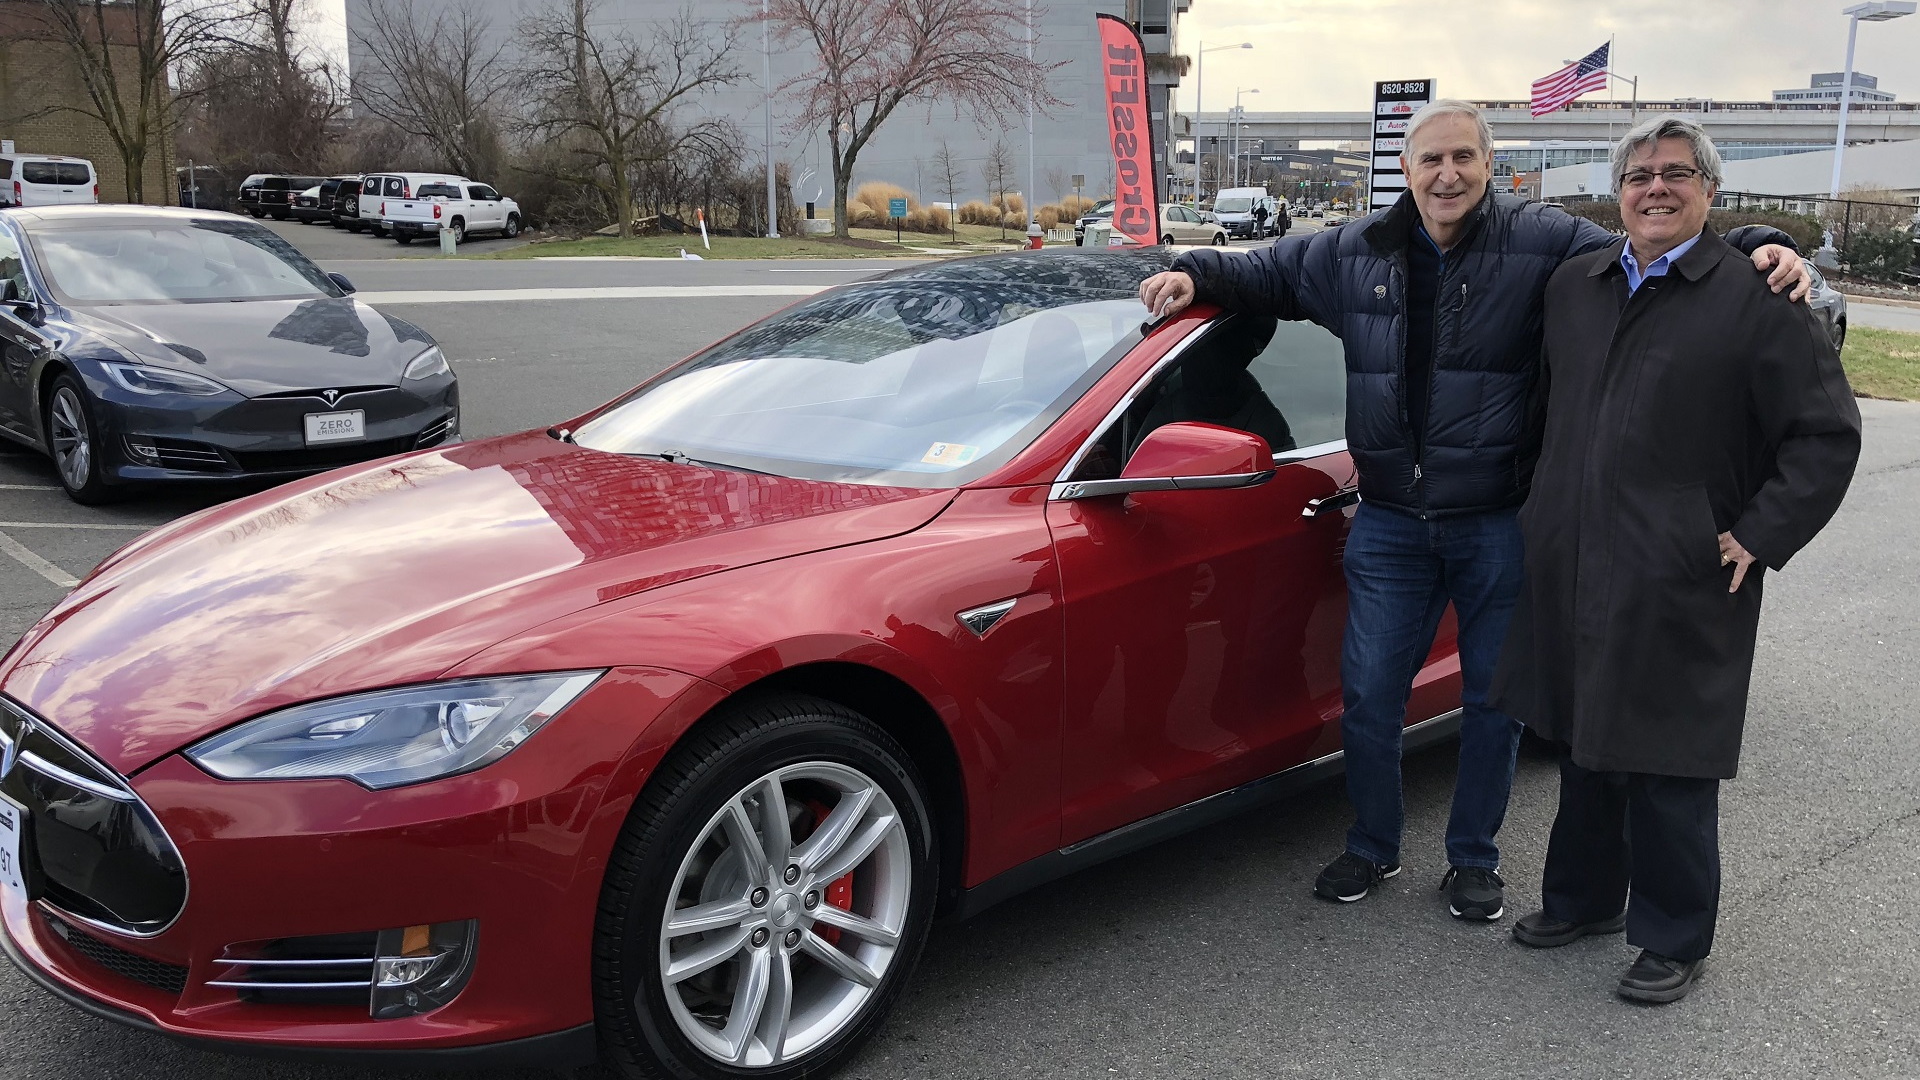 Used 2015 Tesla Model S P85D on day of purchase  [photo: Jay Lucas]